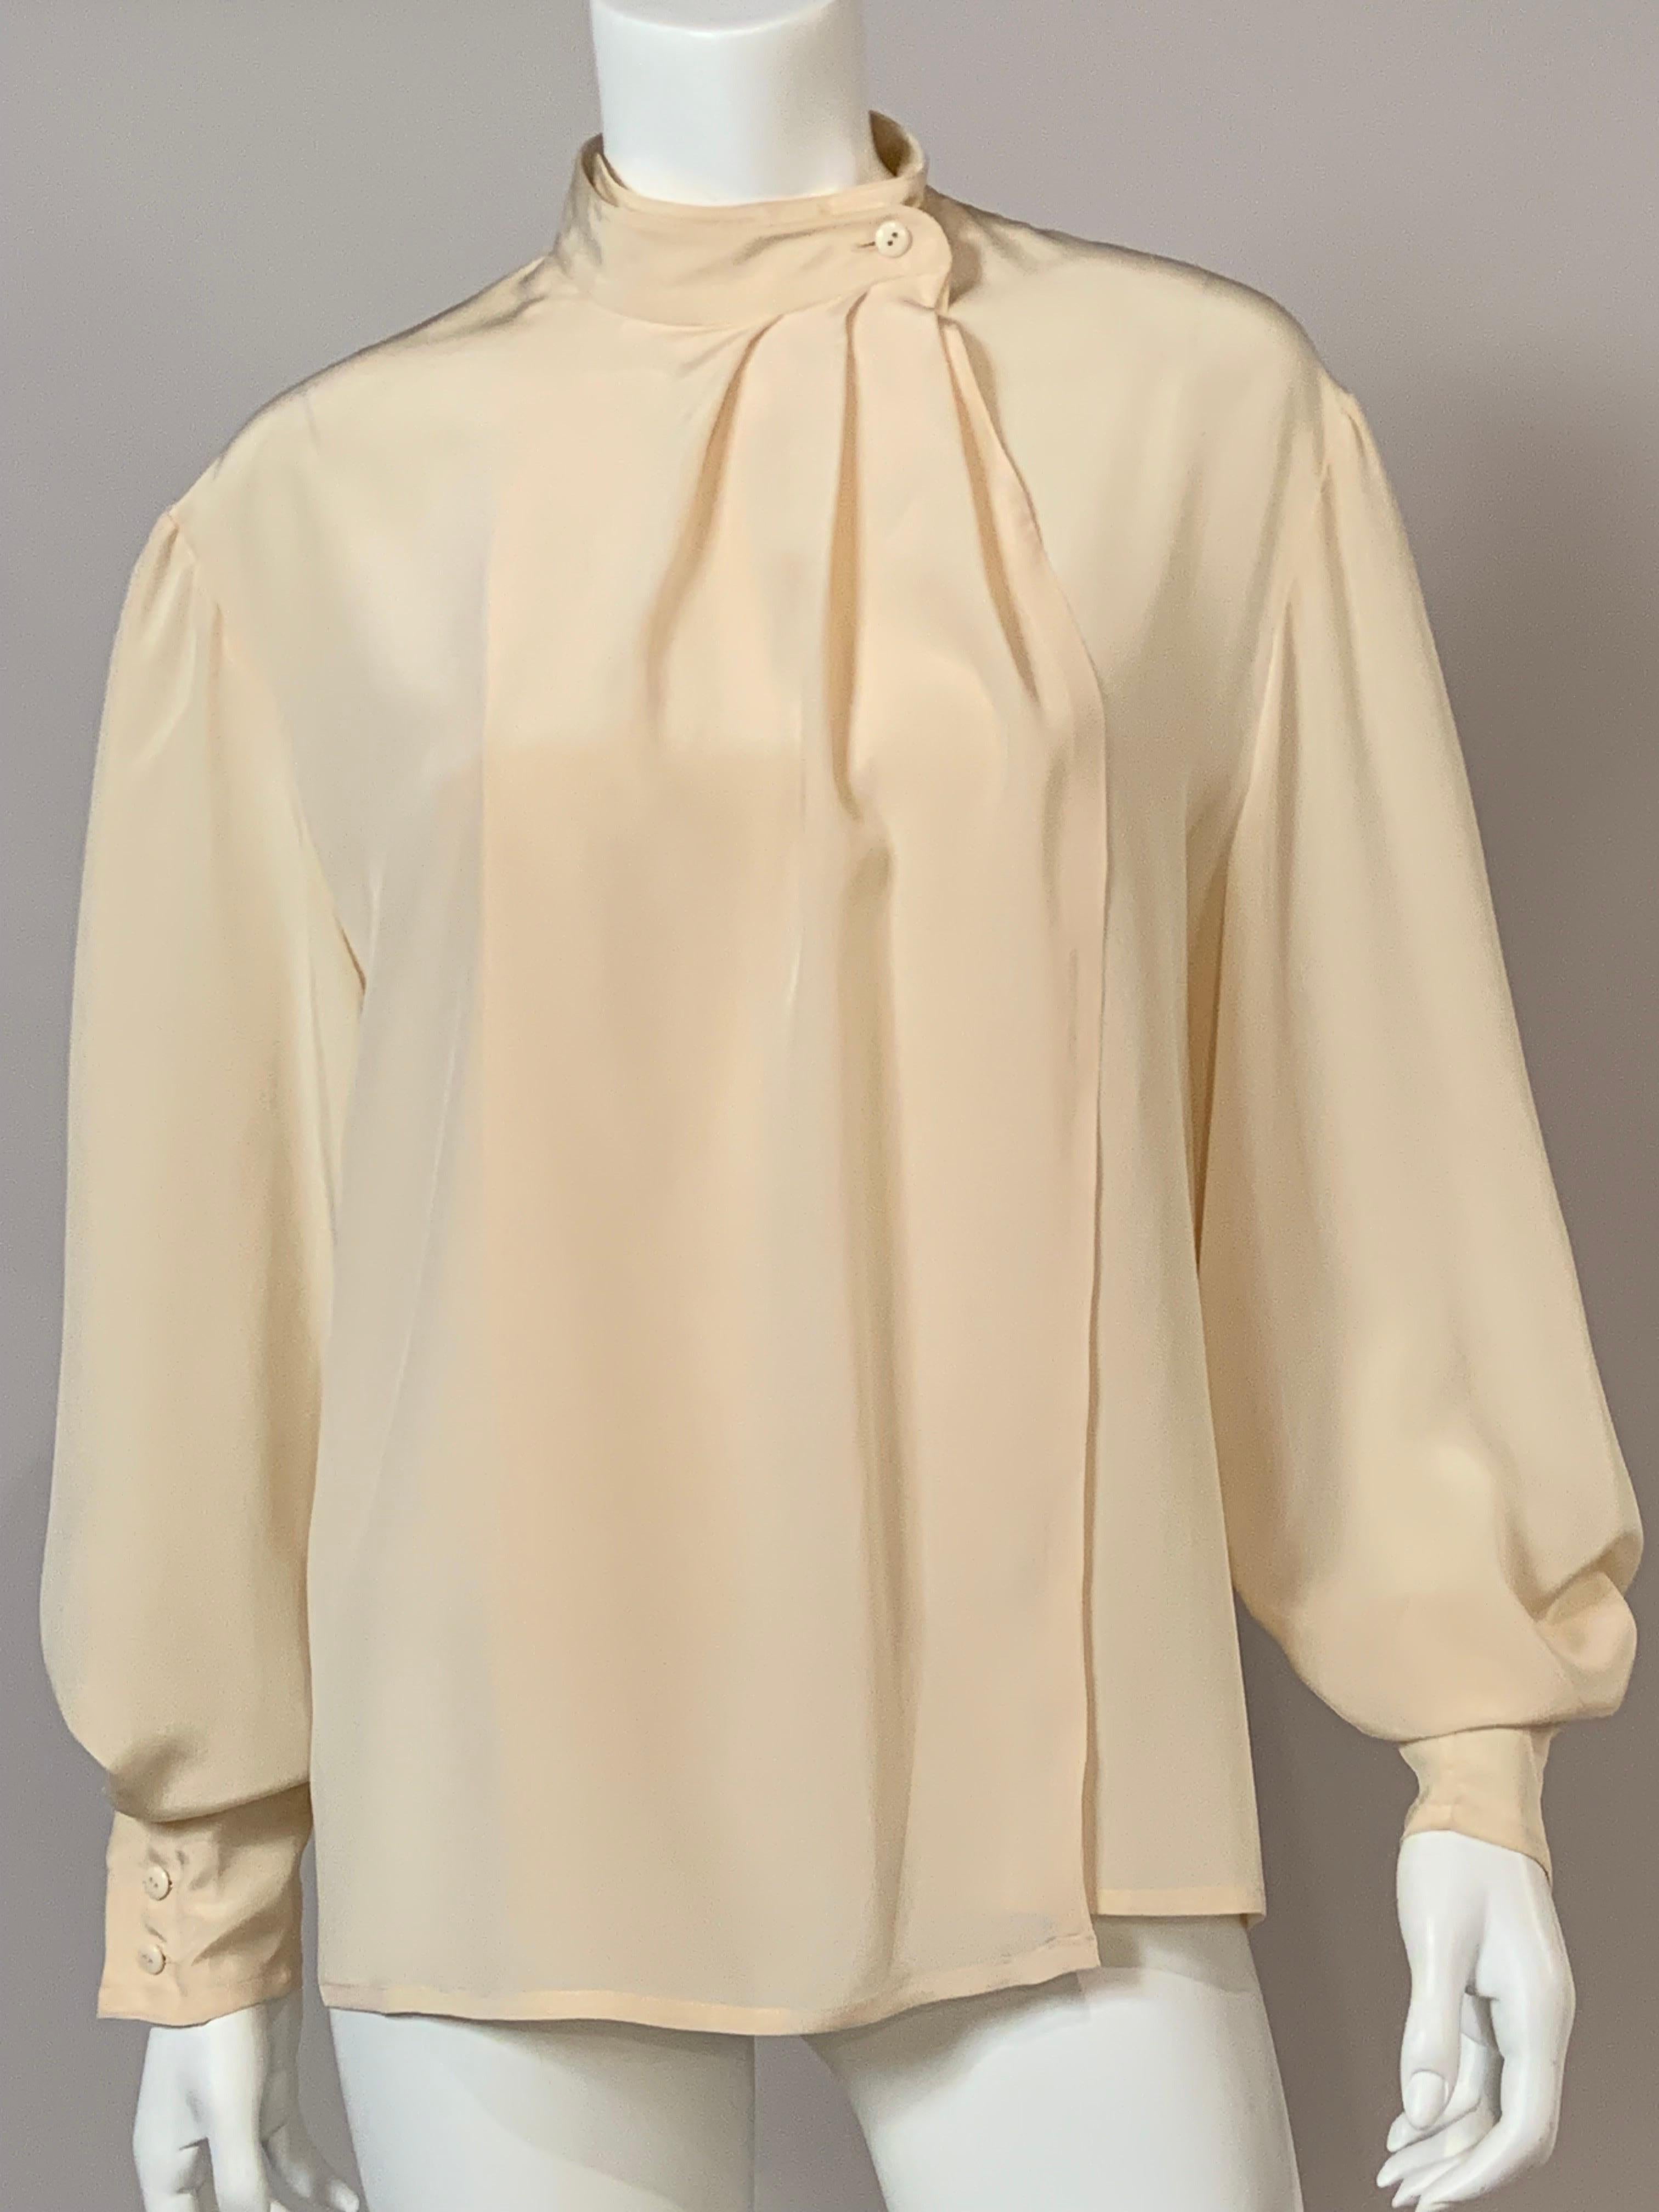 This ivory silk blouse from Ferragamo has a single button closure on the left side of the collar.  I am assuming that it is meant to be belted or tucked in.  The long sleeves have three buttons at the wrist.  It is in excellent condition, appears